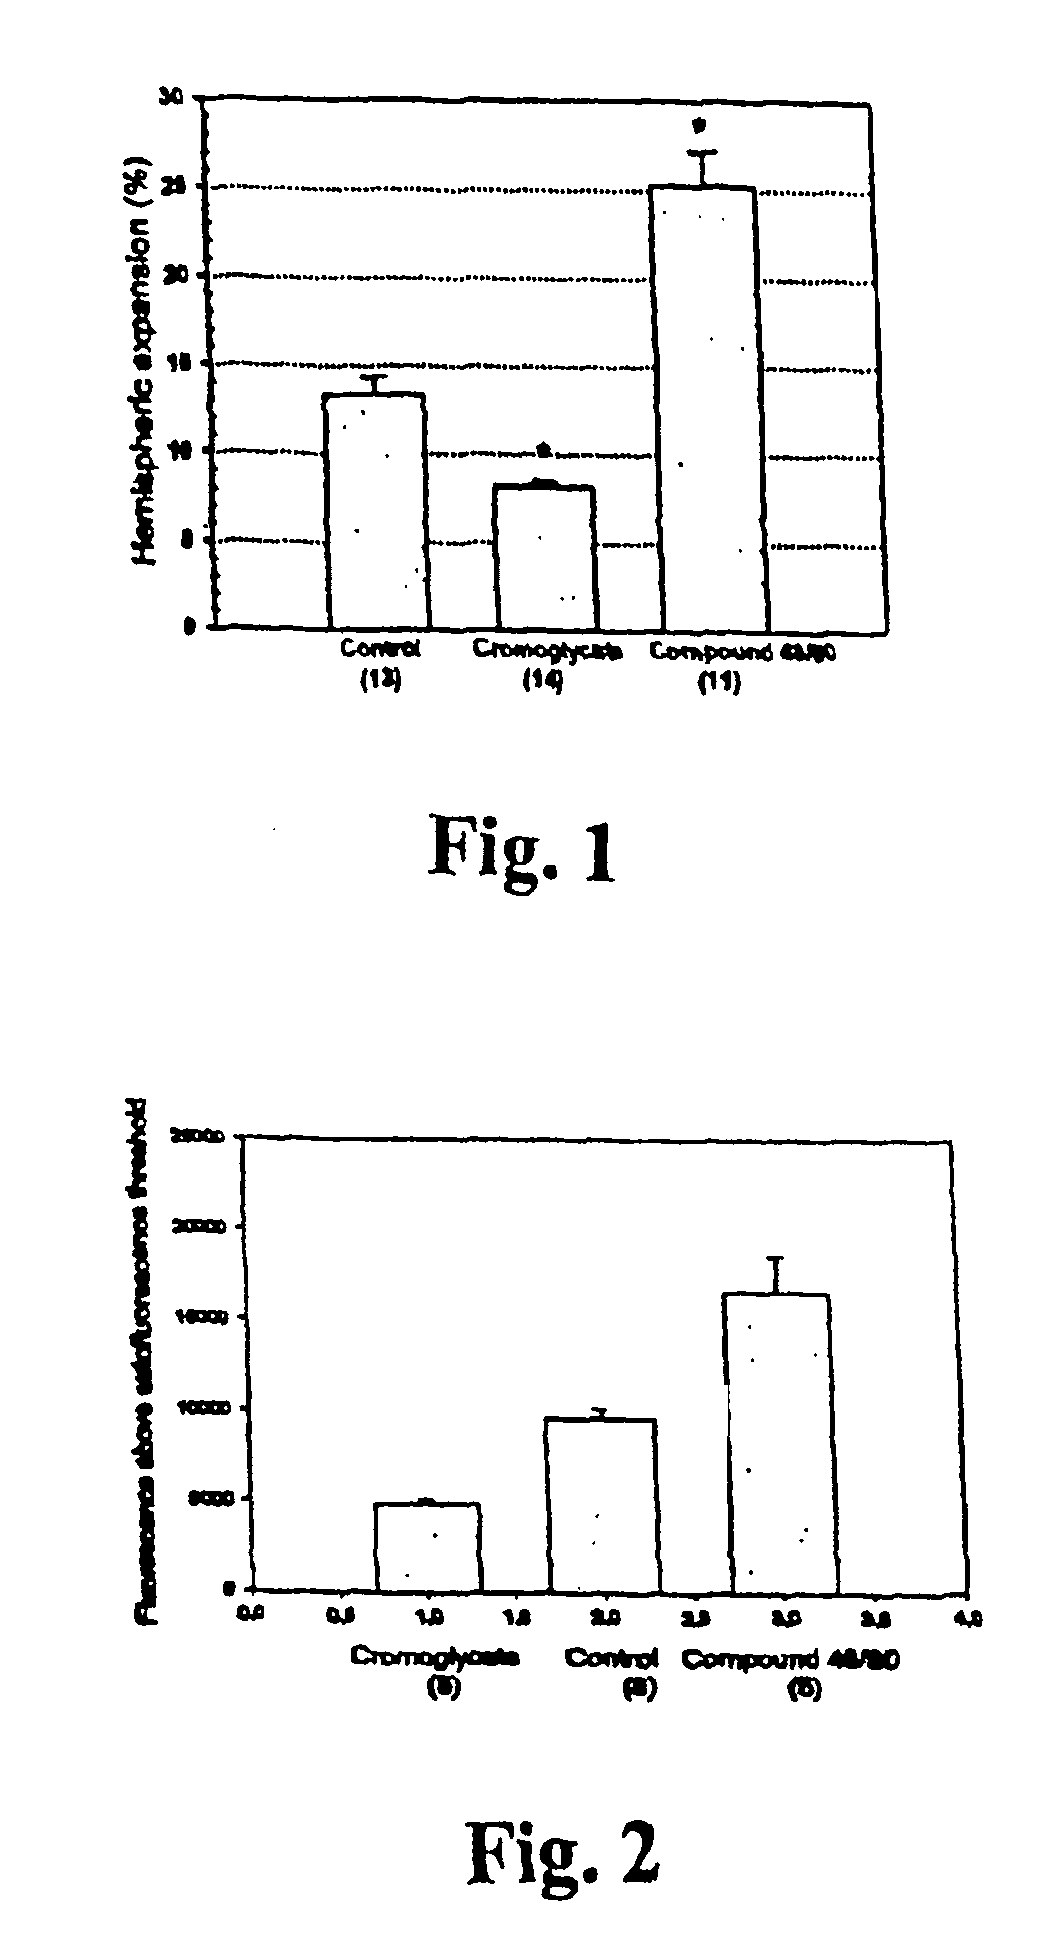 Use of a mast cell activation or degranulation blocking agent in the manufacture of a medicament for the treatment of a patient subjected to thrombolyses